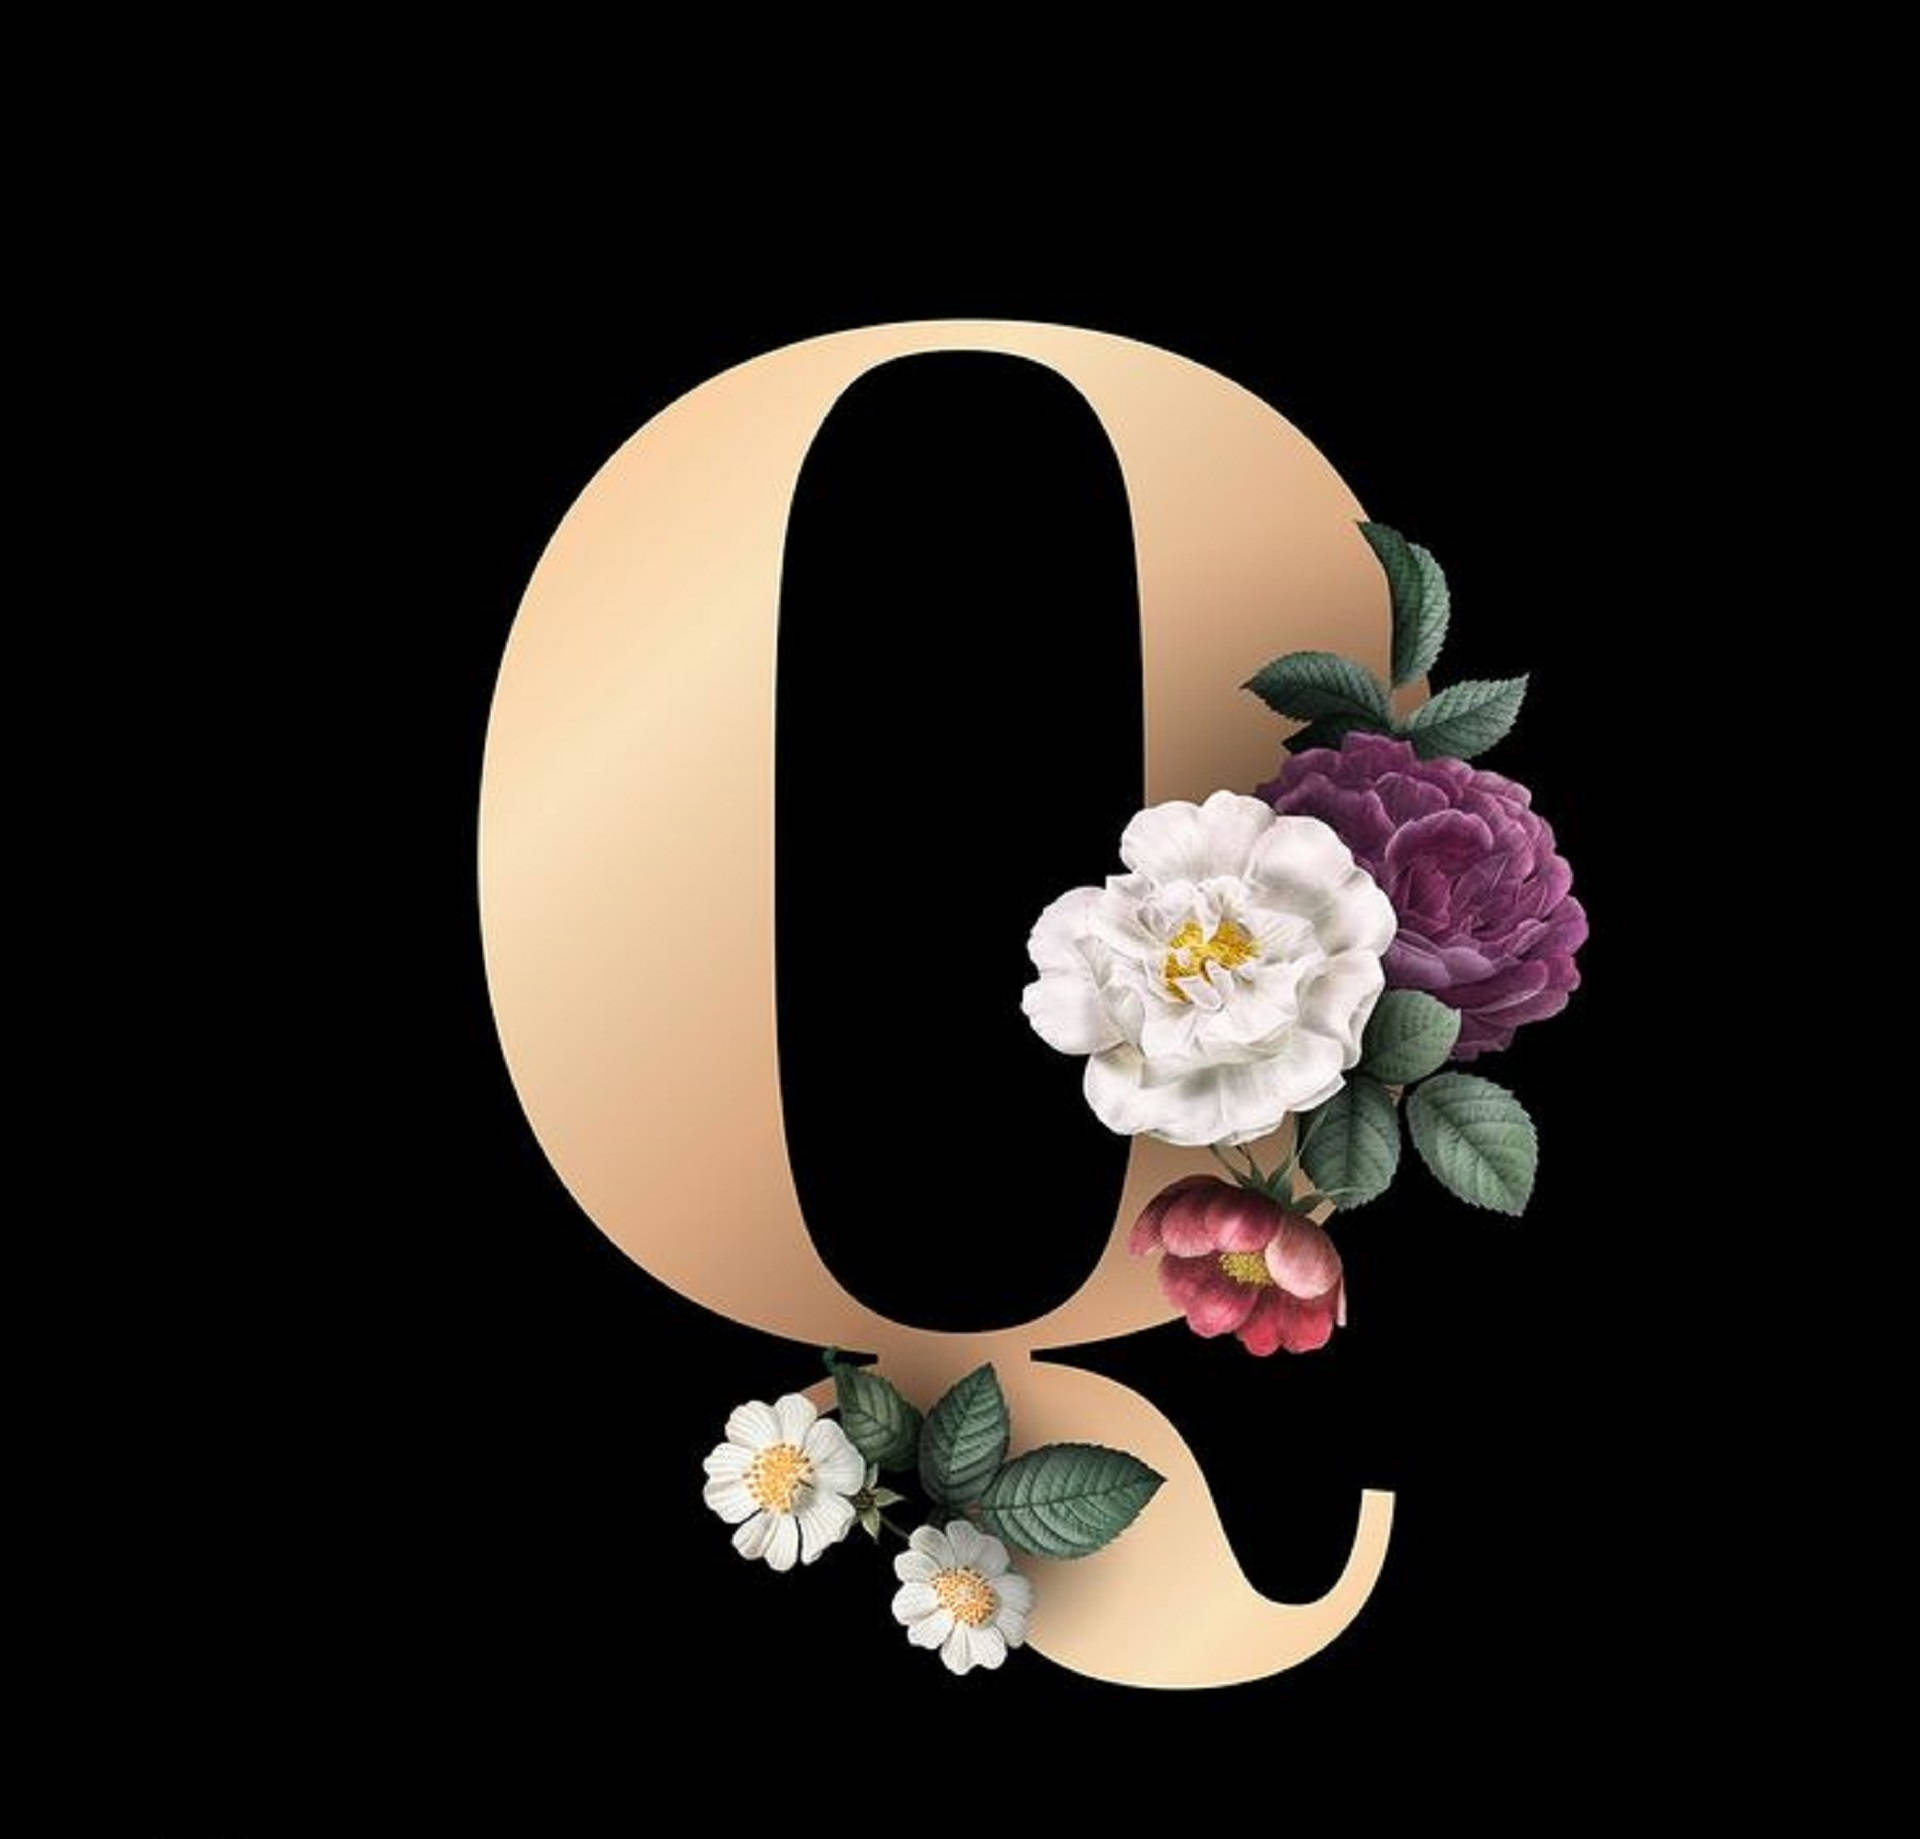 Pictorial Representation Of Flora Inspired Letter Q Background